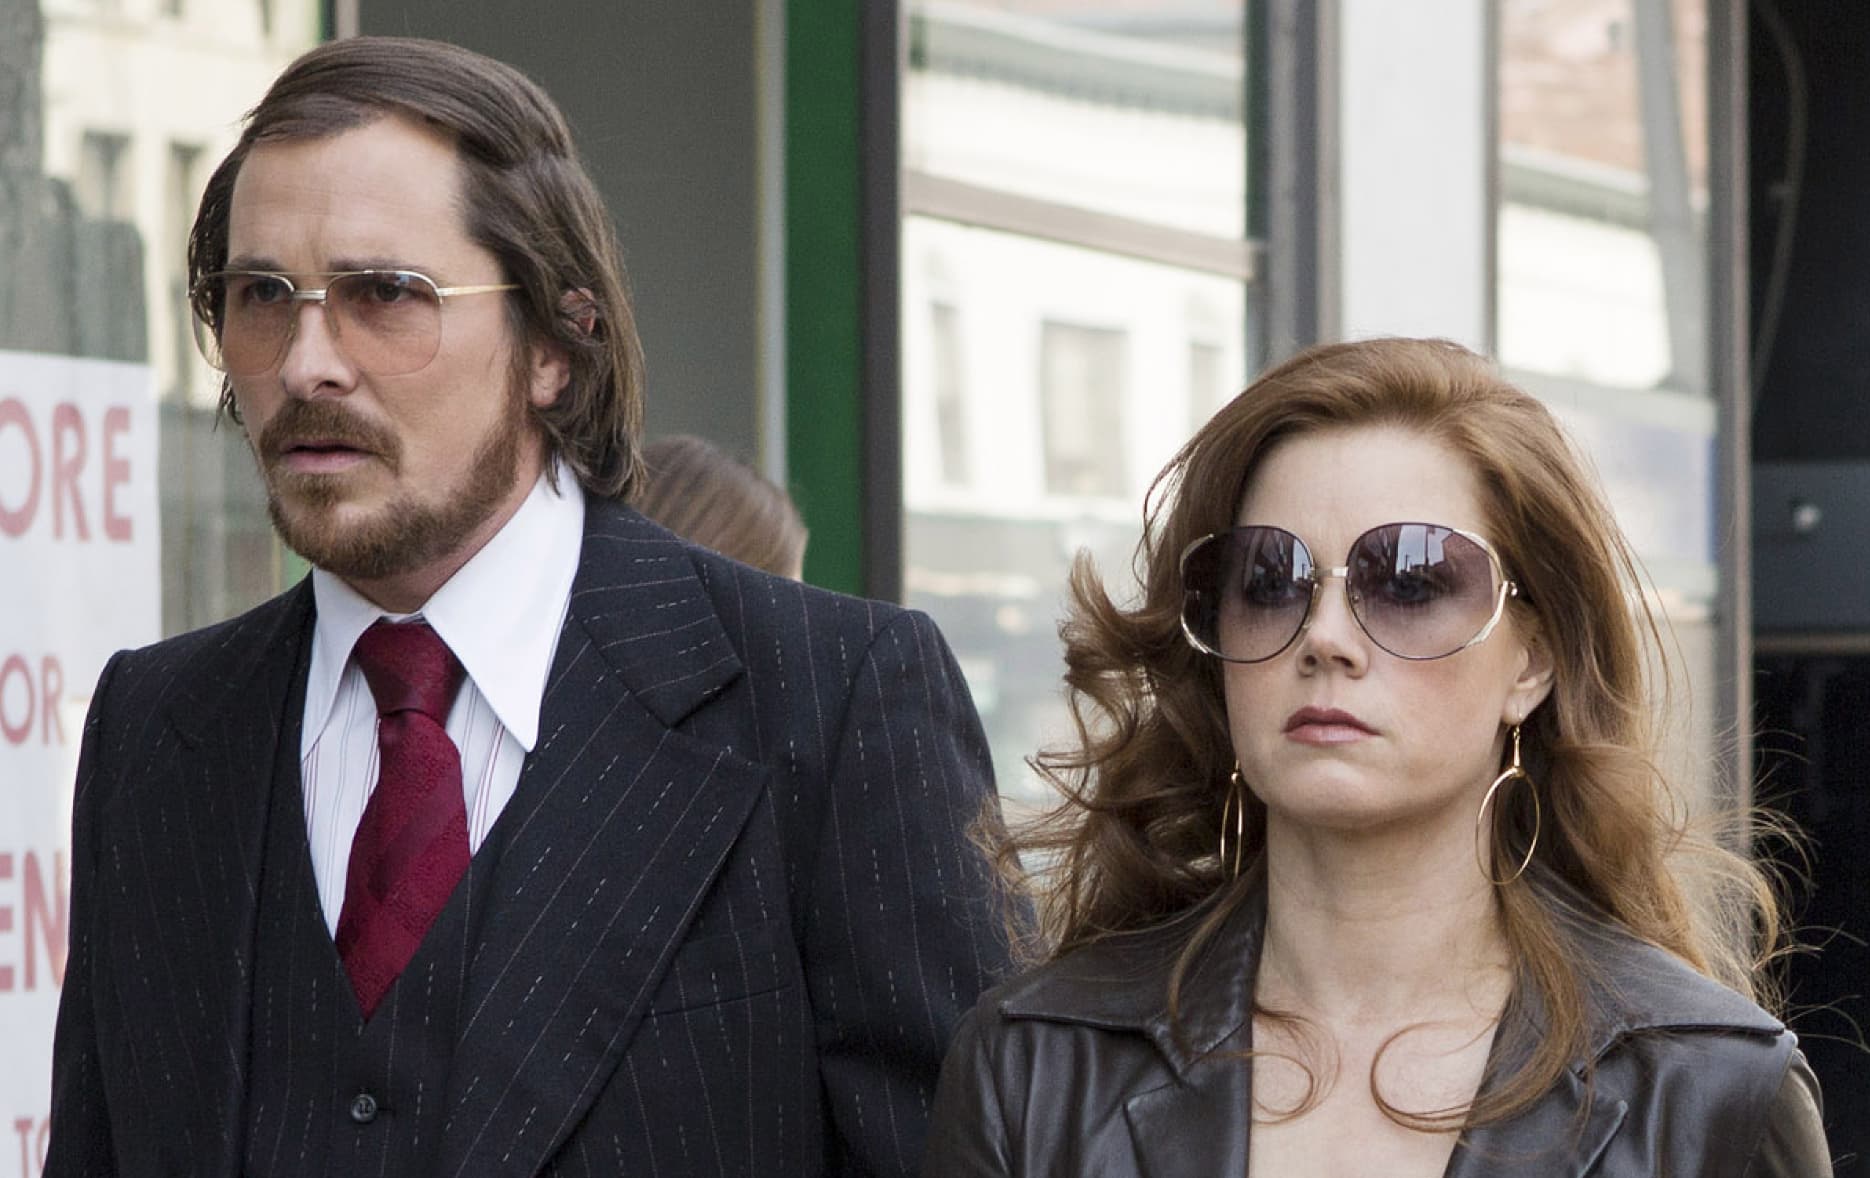 “The leaked Sony emails revealed that David O. Russell was so abusive to Amy Adams on the set of American Hustle that Christian Bale had to step in to defend her.”